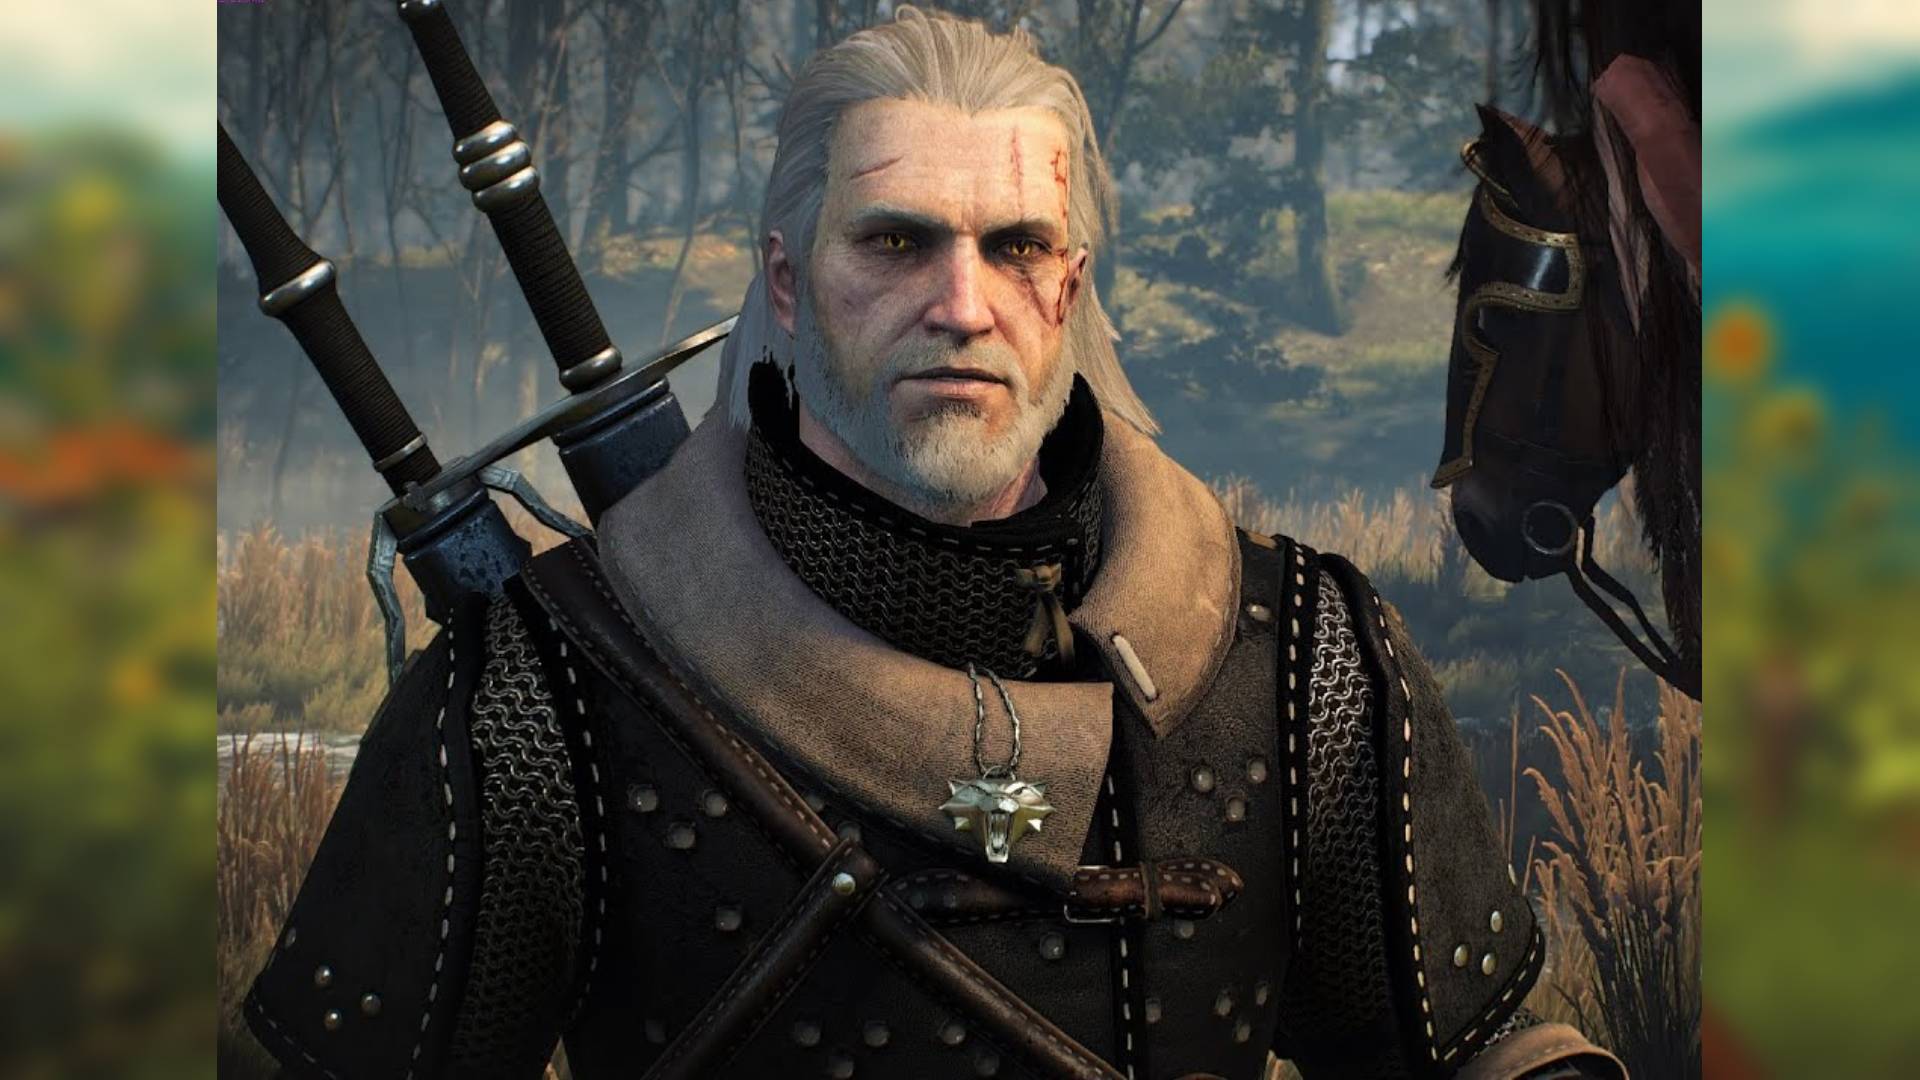 The Witcher 3 Netflix DLC: How to get the Netflix armor and weapons in The  Witcher 3